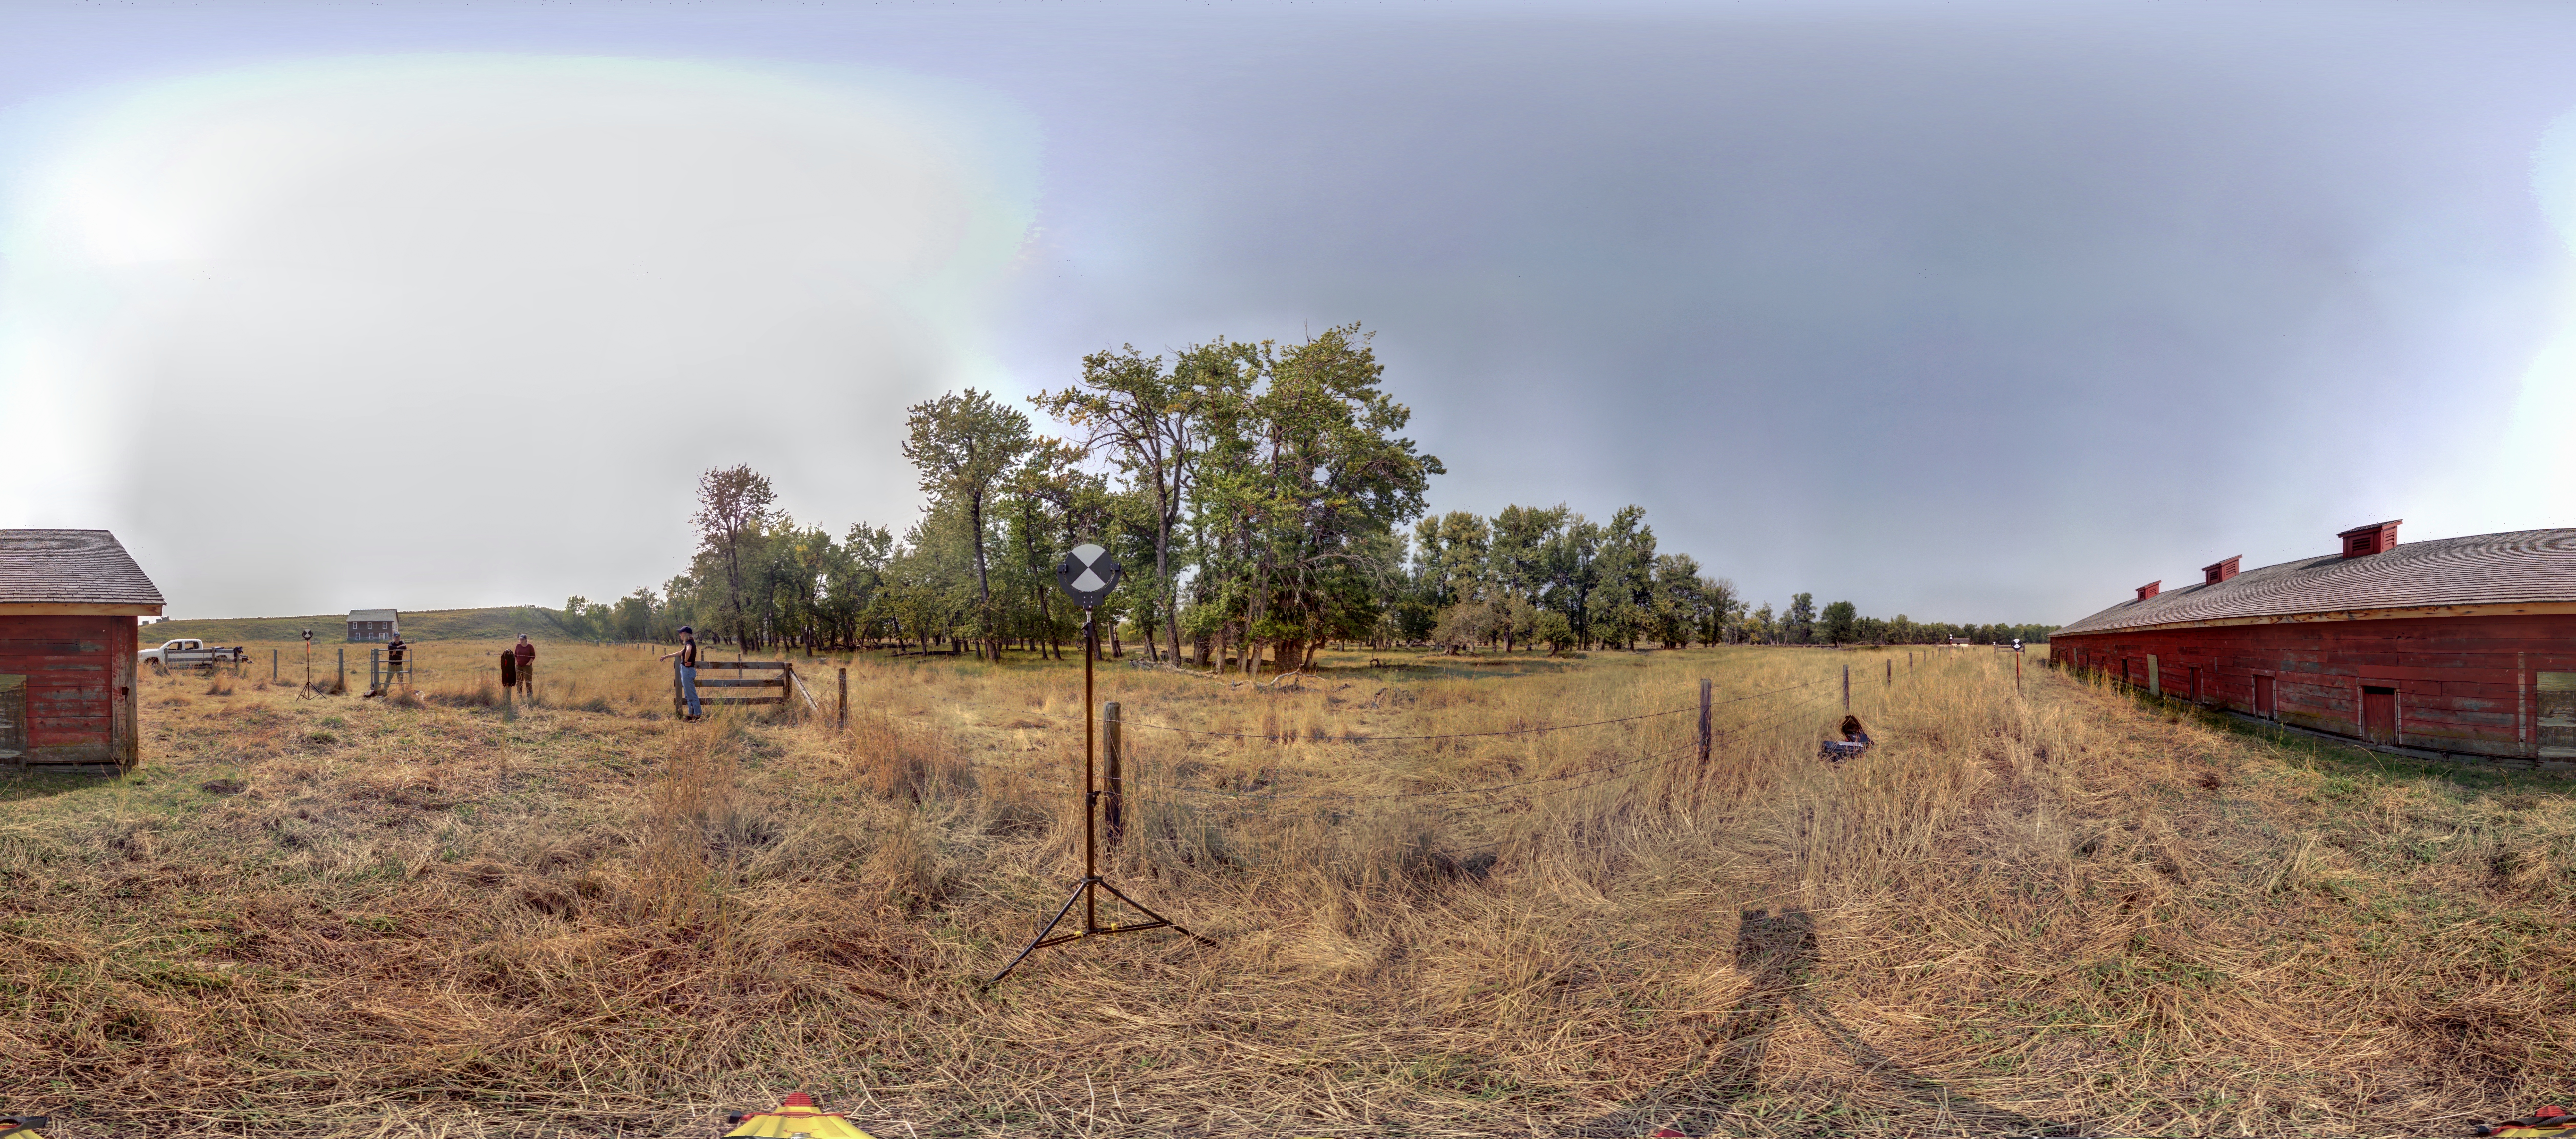 Panoramic image from scan location 25 of the exterior of the Piggery at Bar U Ranch